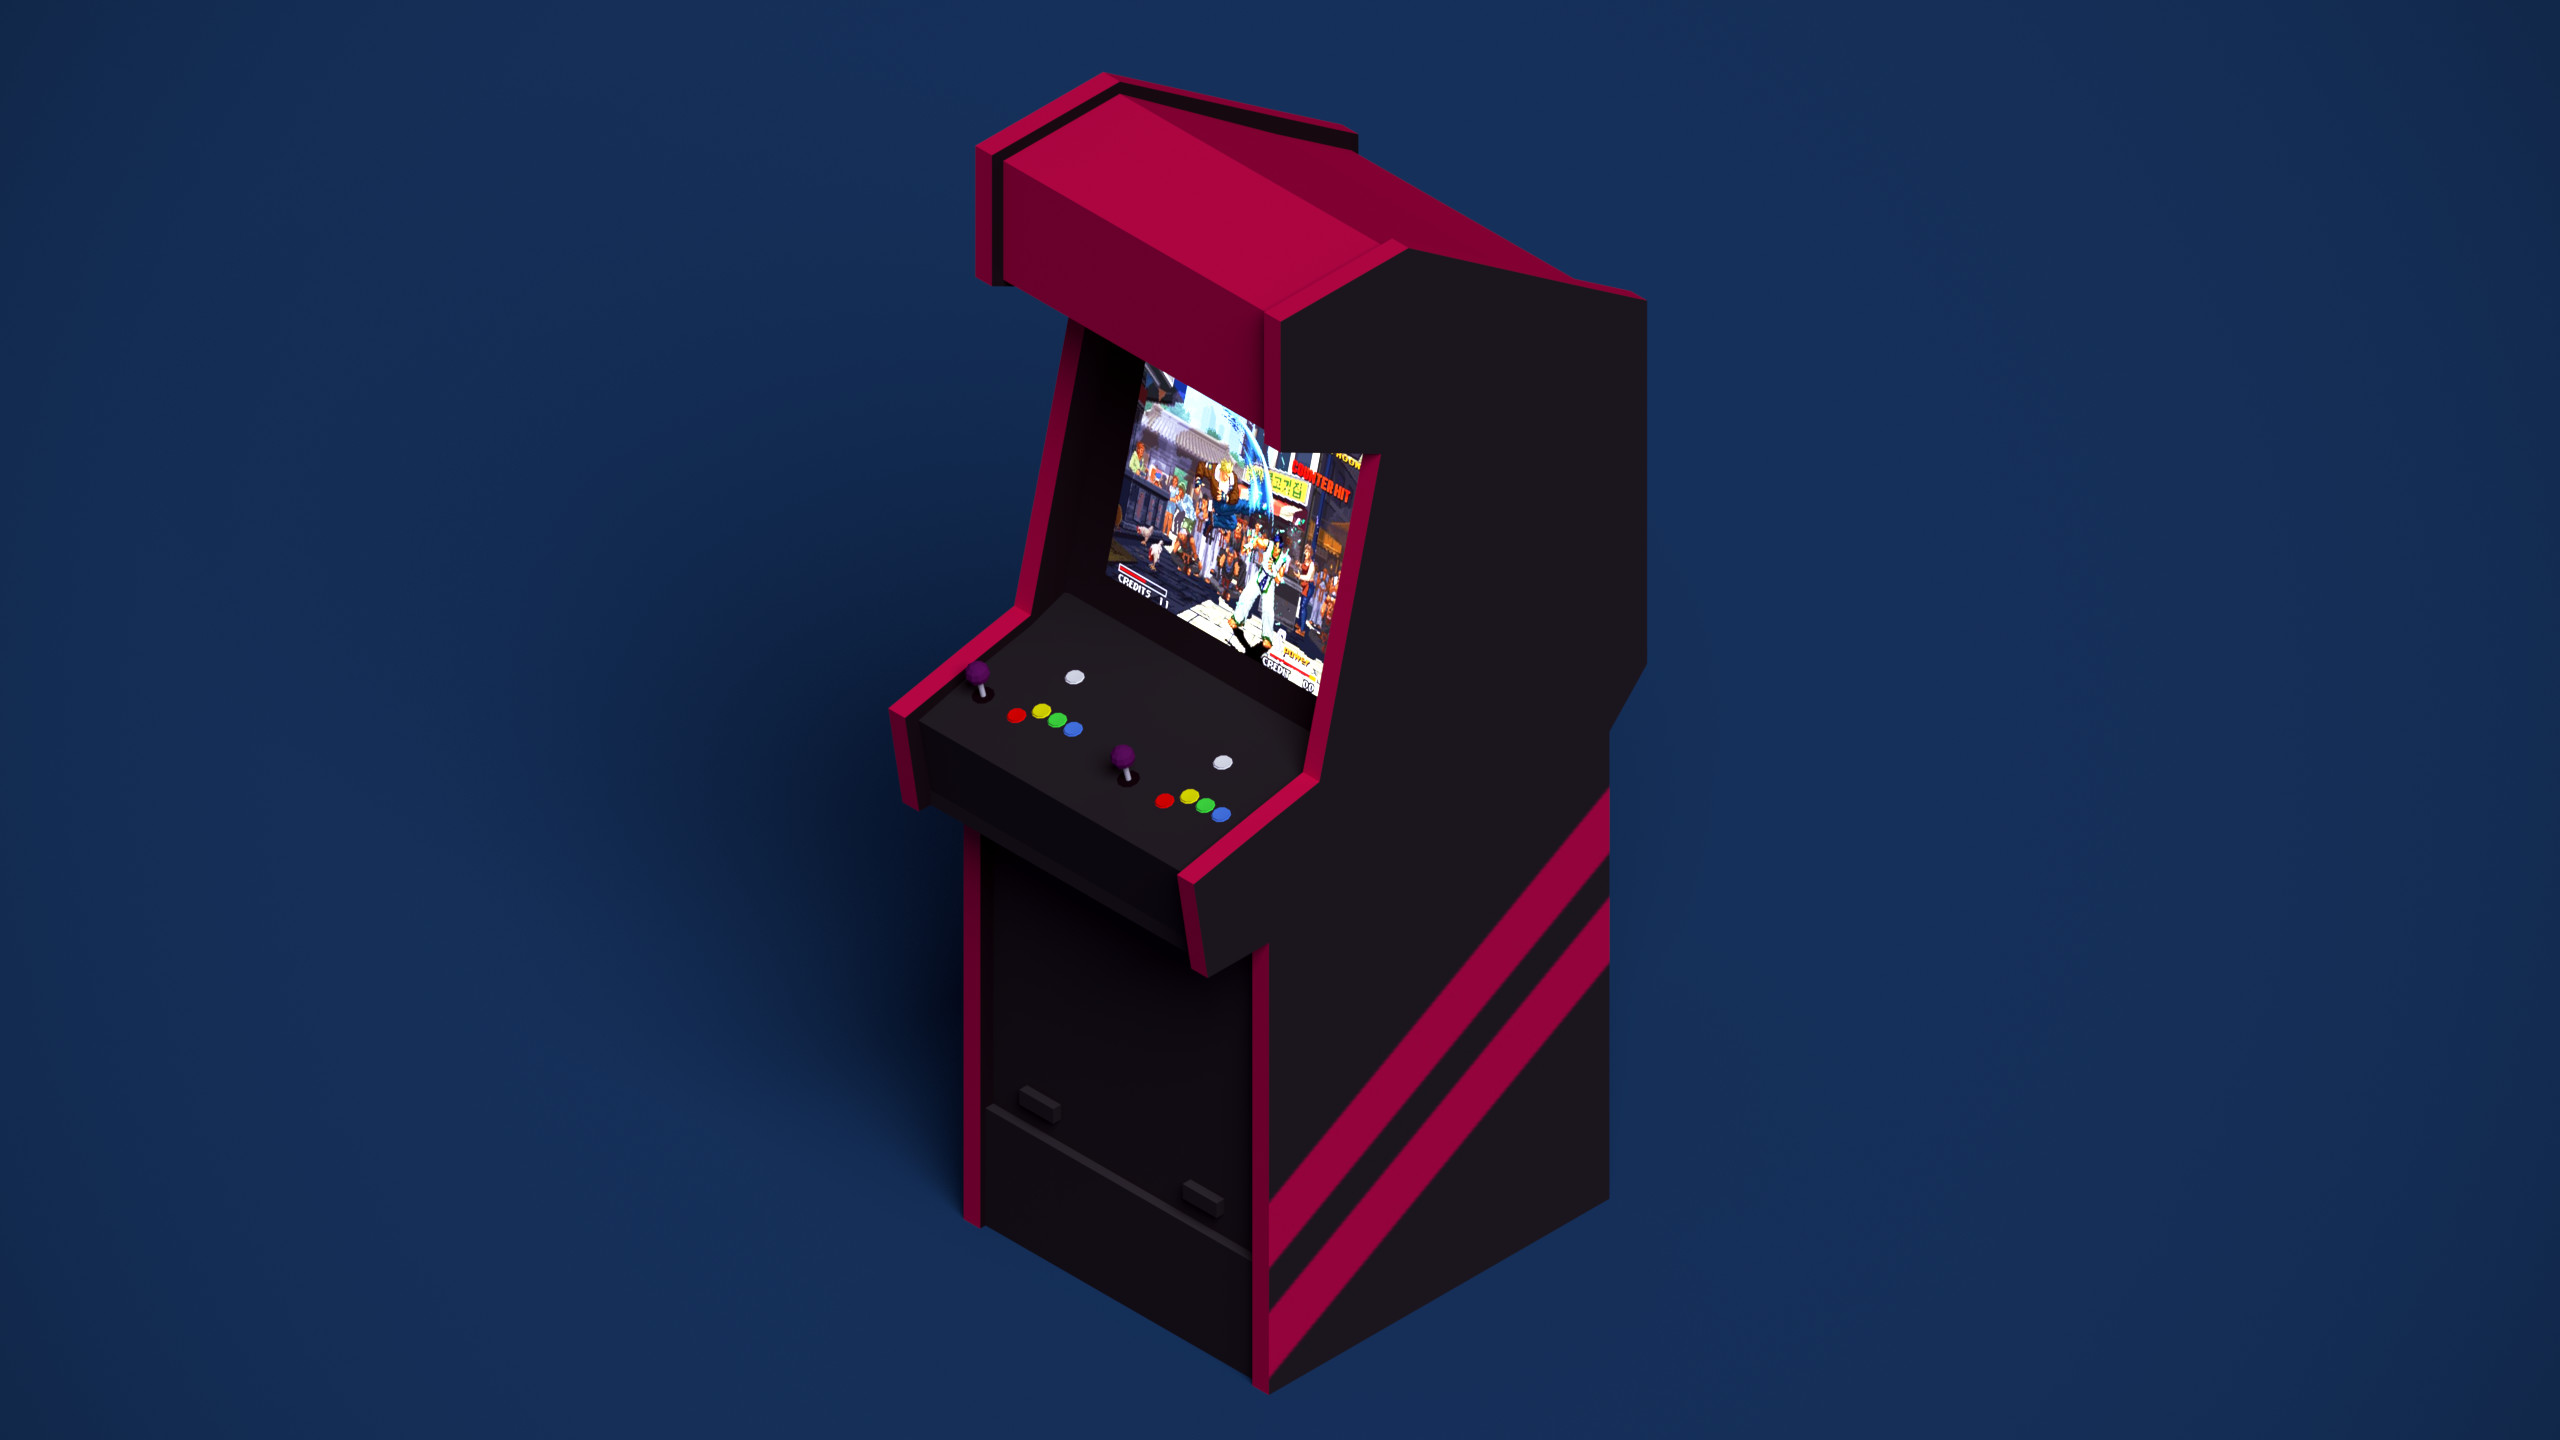 2560x1440 Video Game - Arcade Low Poly Wallpaper